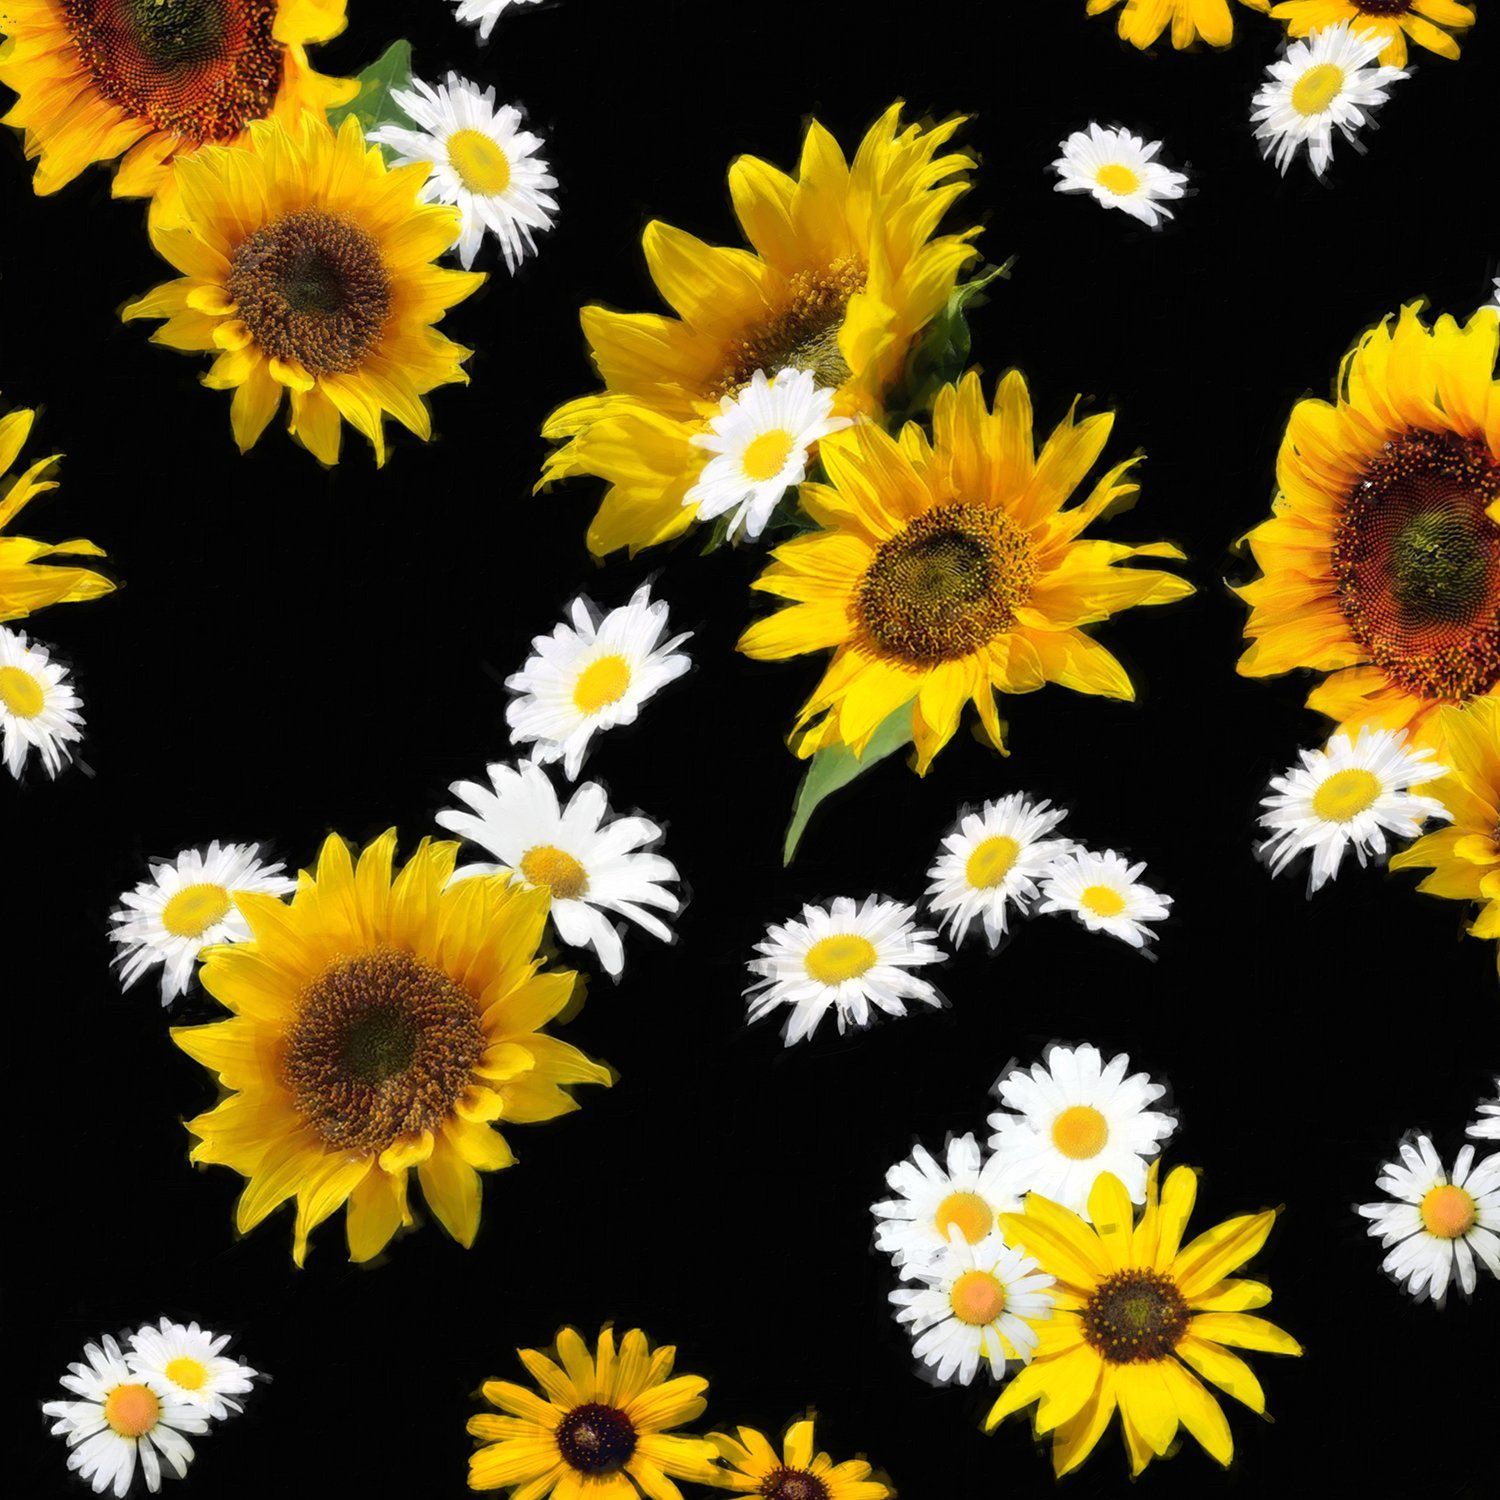 Sunflowers And Daisies Fitted Tank Top Regular Length. Sunflowers And Daisies, Sunflower, Sunflower Wallpaper